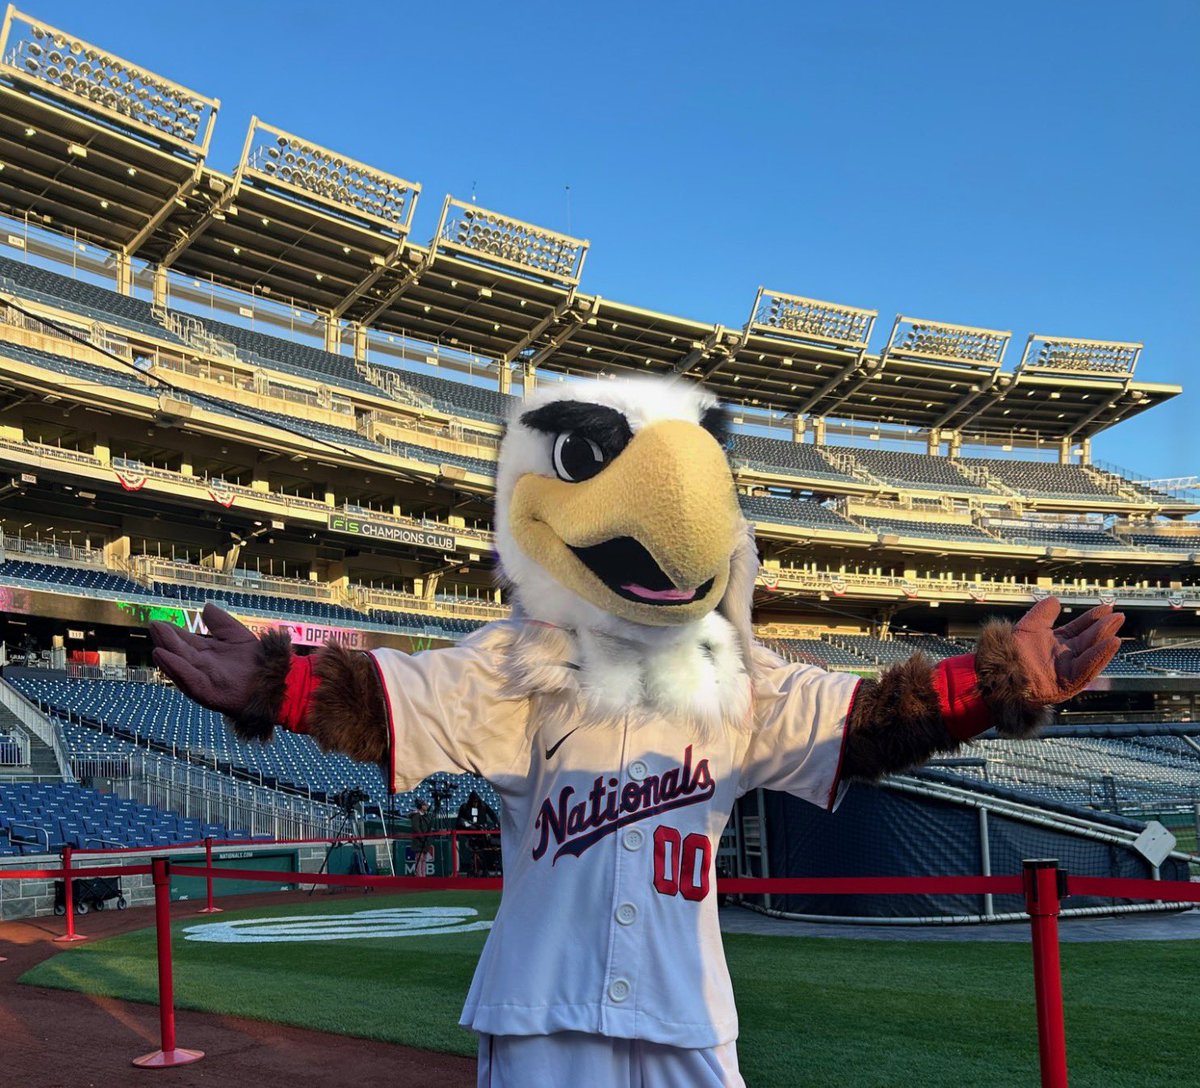 As of this April 1st: Screech is officially rocking the Red! 

@Caps_Slapshot hold down the fort at NatsPark!